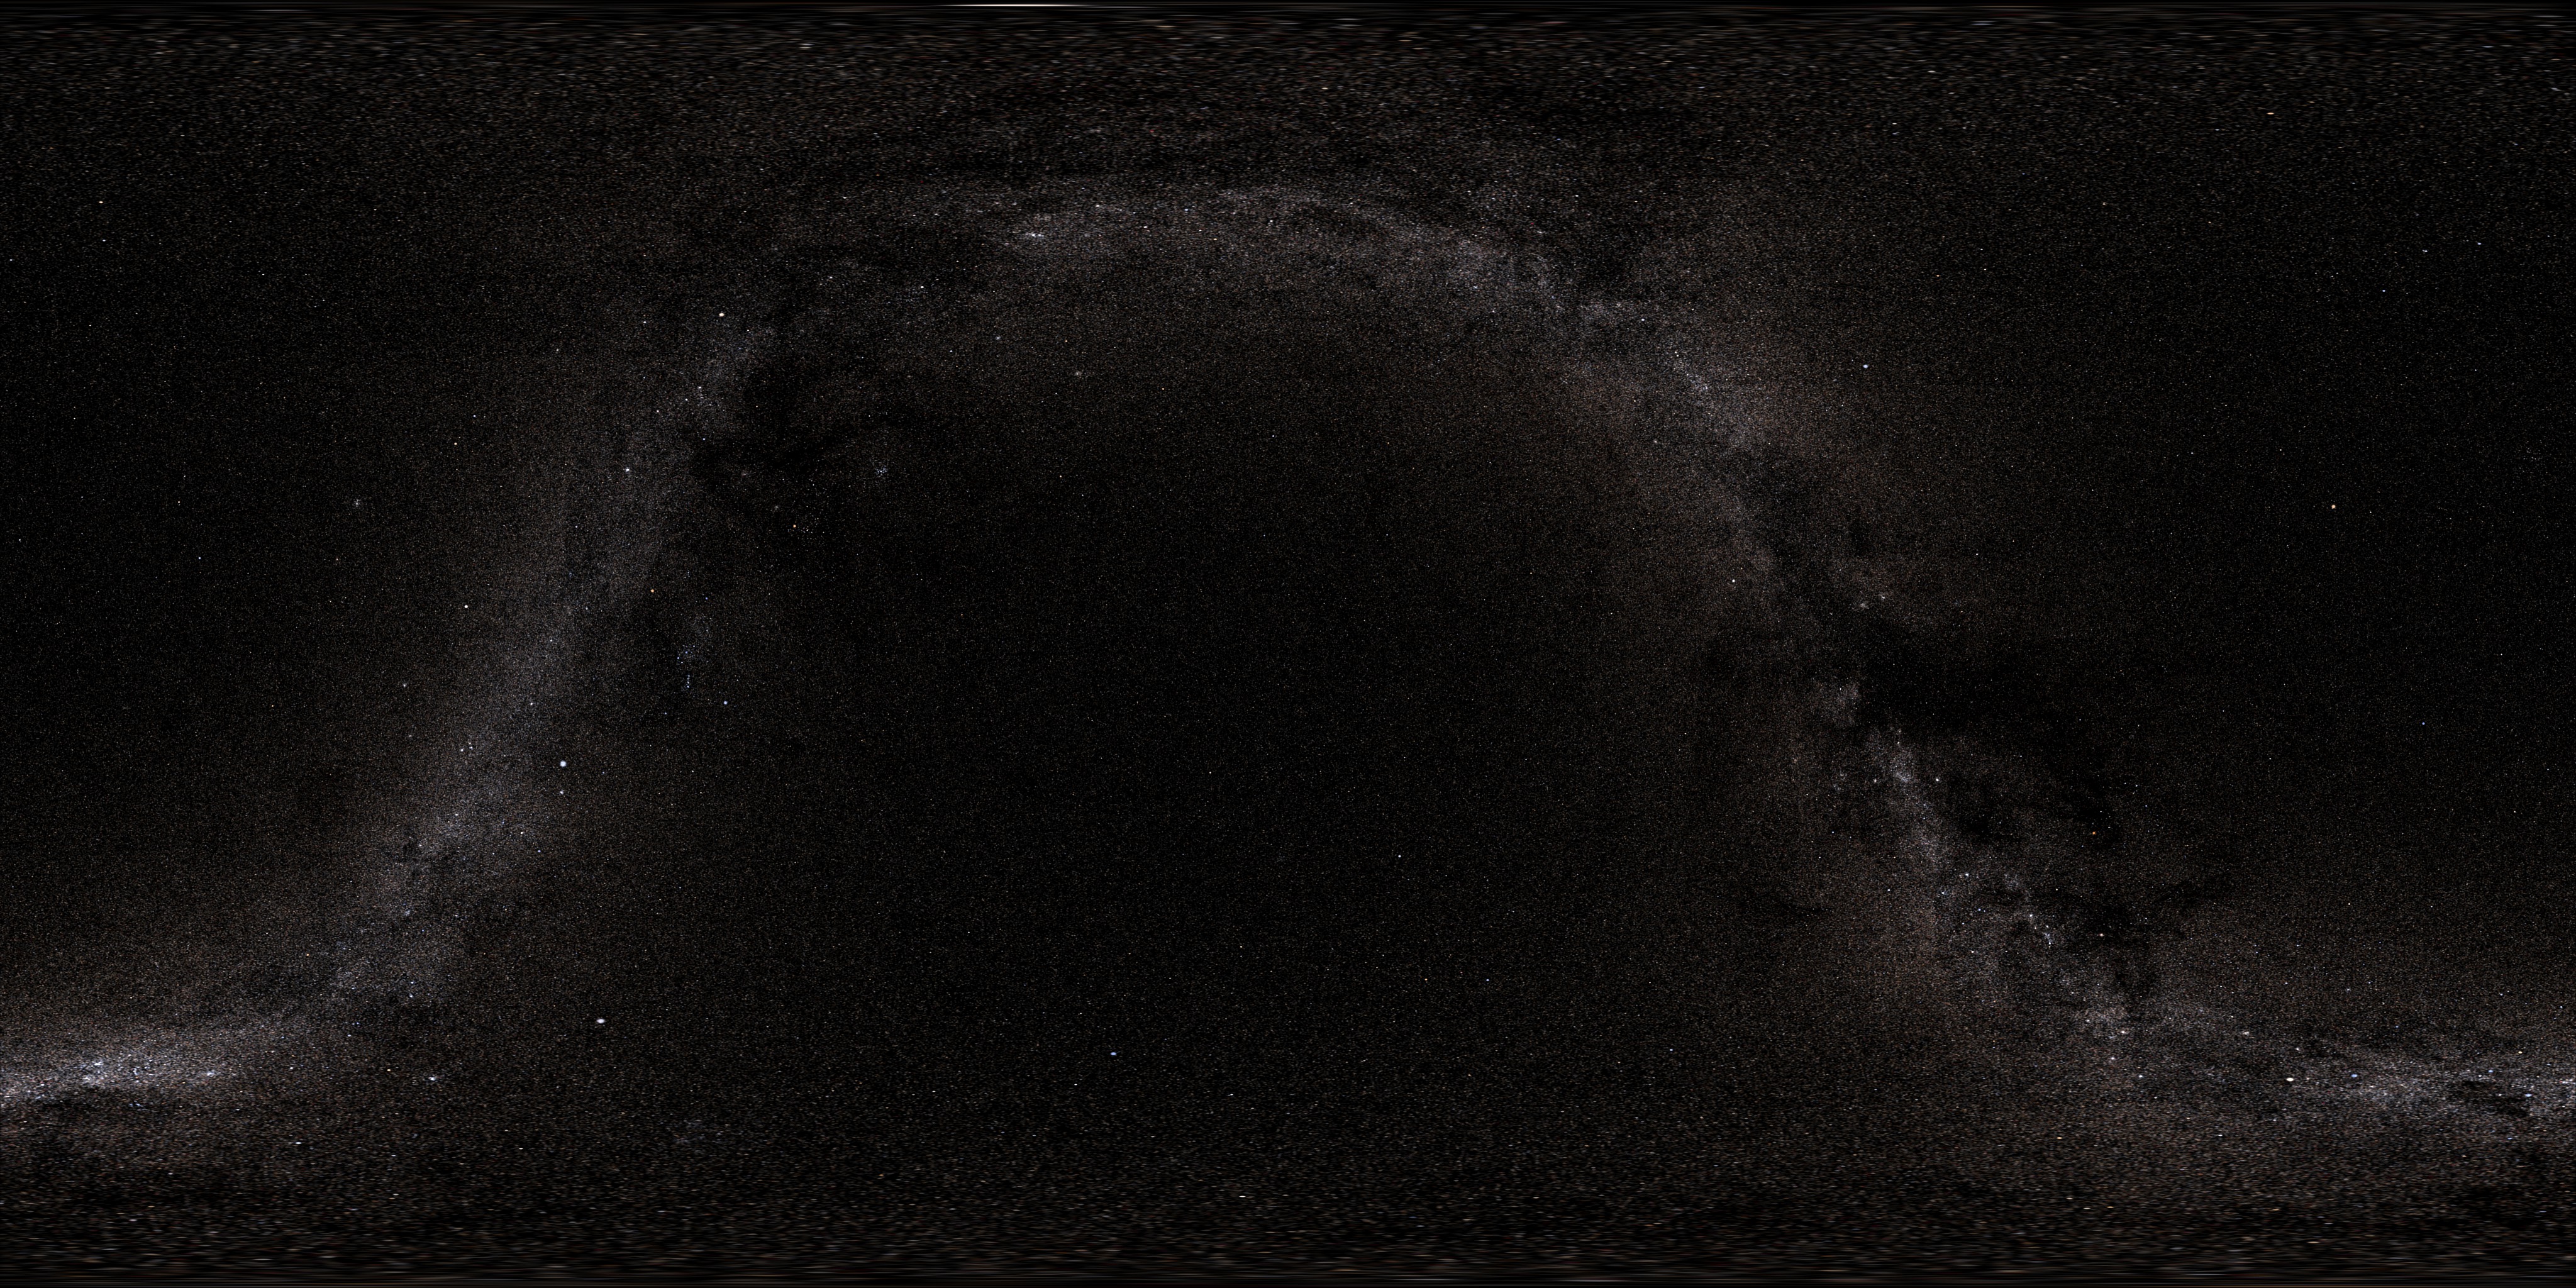 A low-resolution version of the skymap. The threshold magnitude is 3.0 so the Milky Way is very faint.